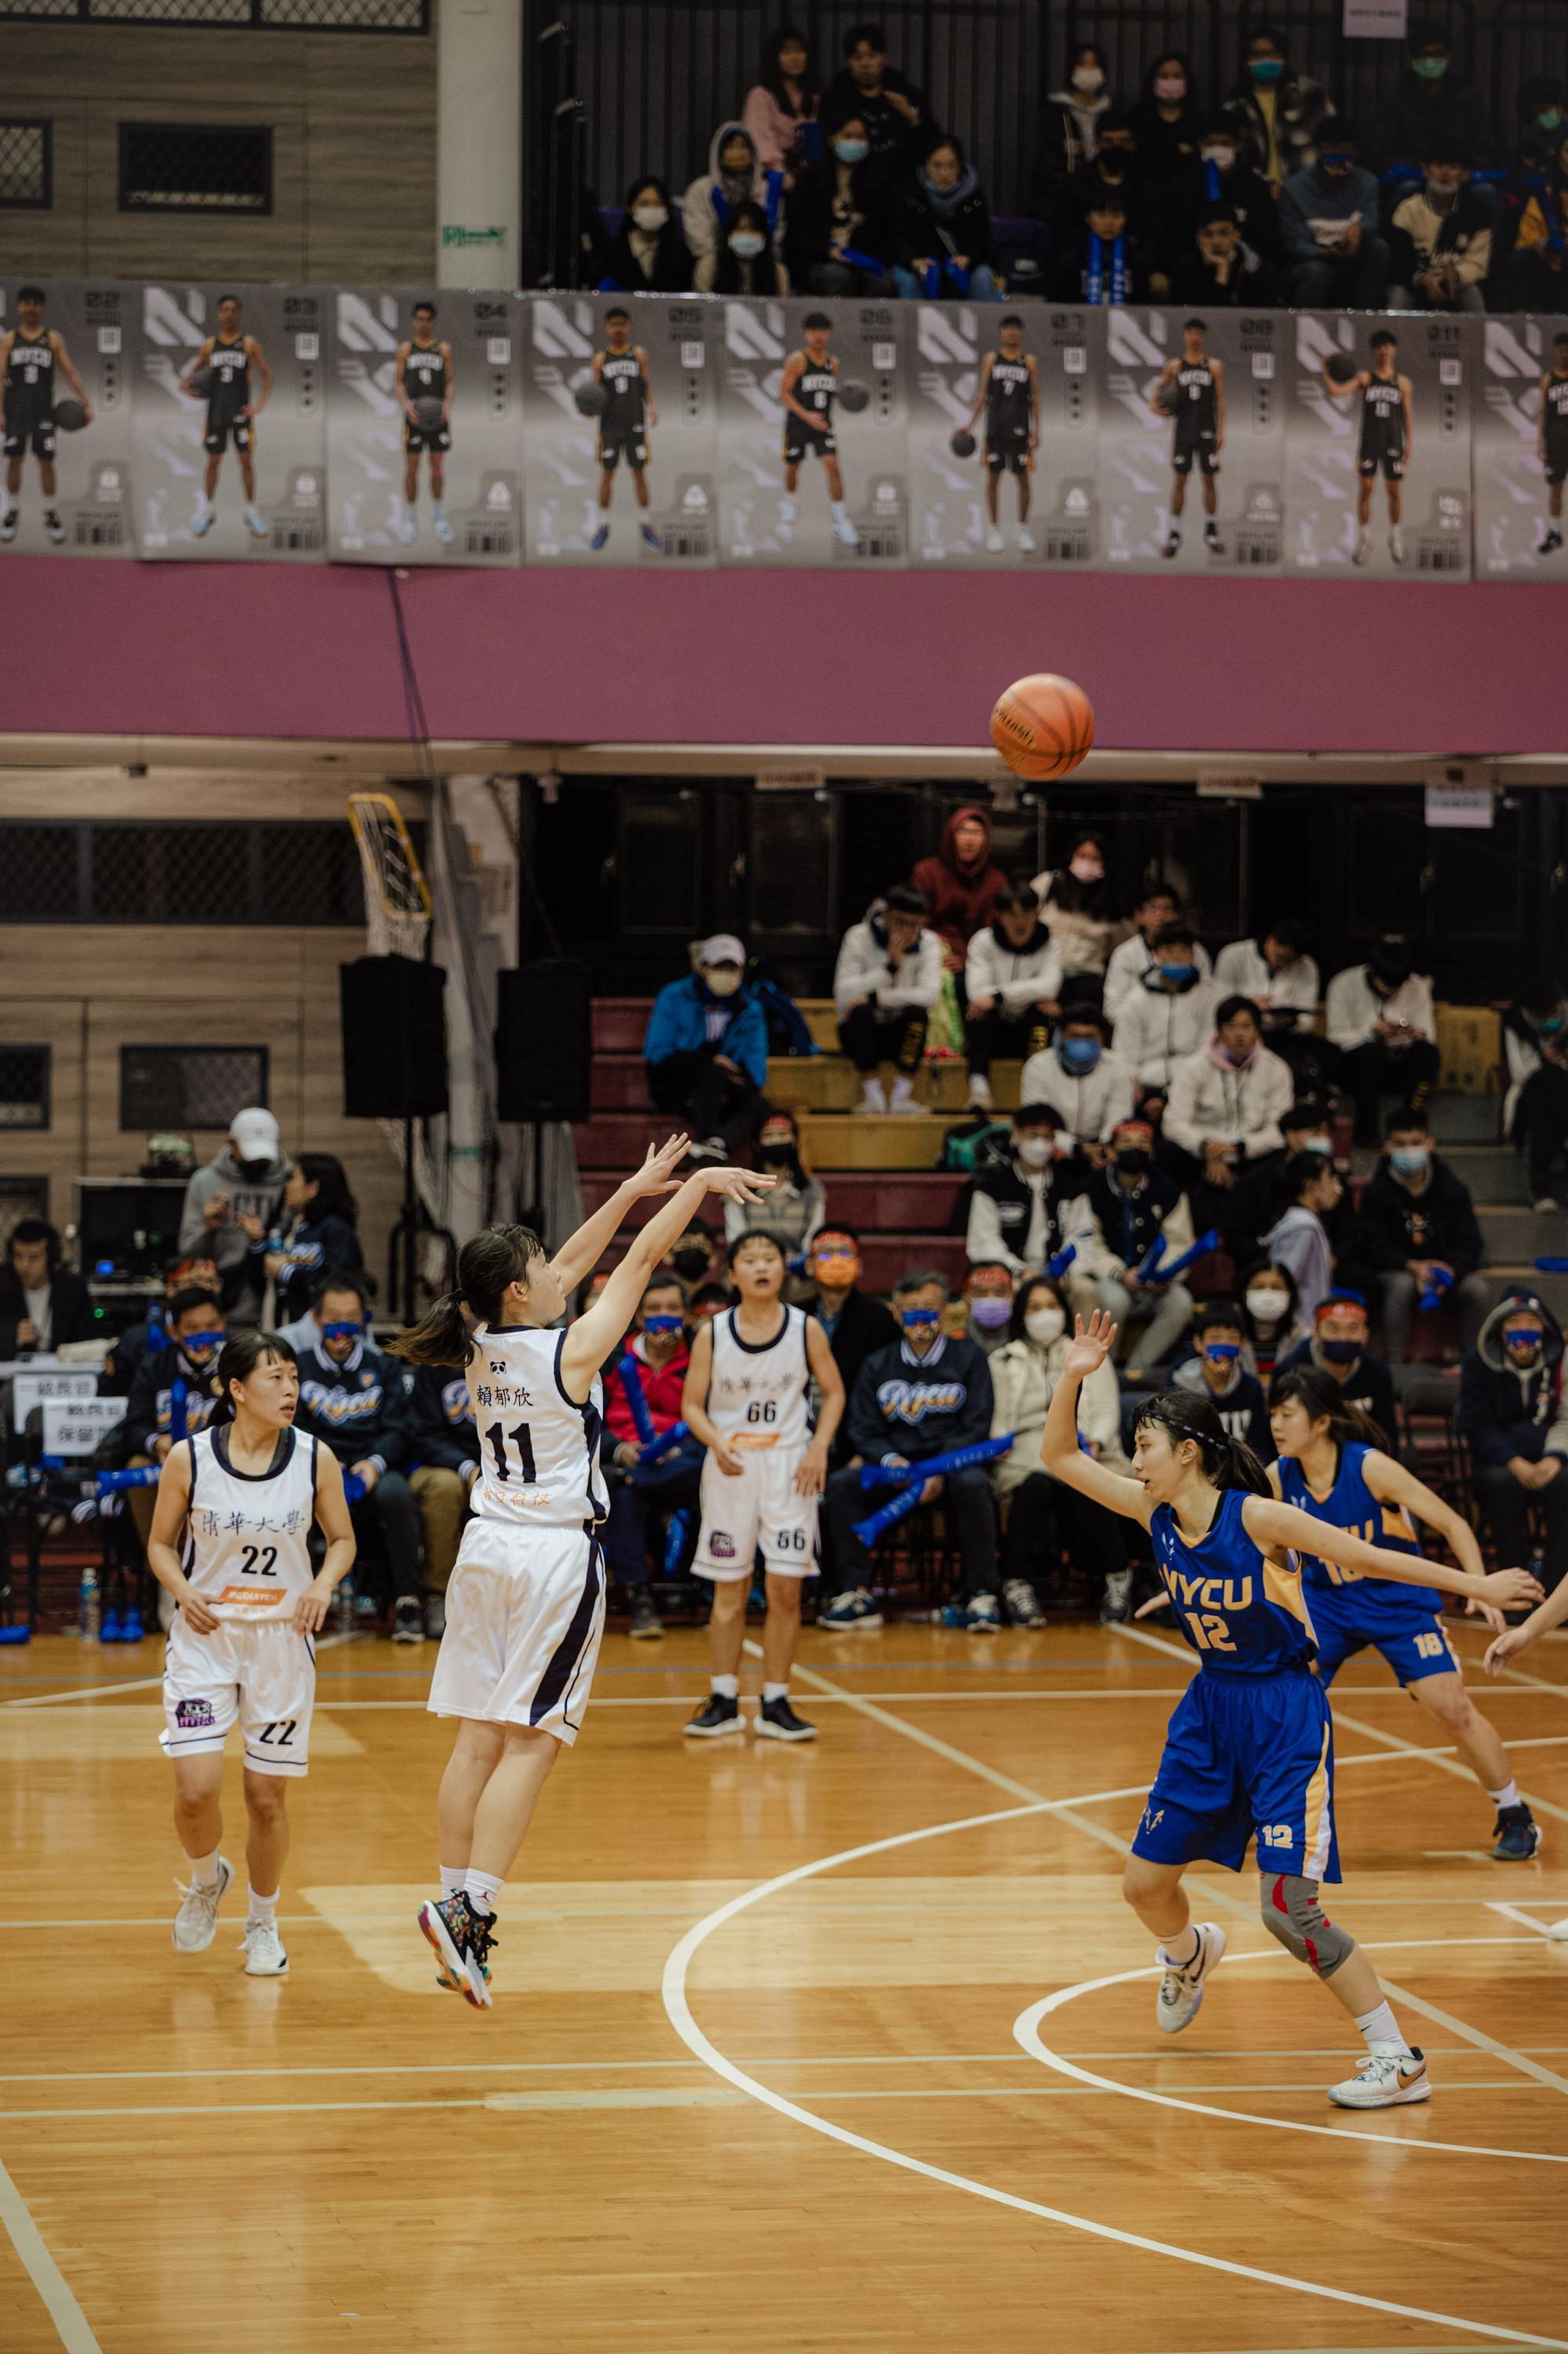 NTHU’s Lai,Yu-sin (賴郁欣) (no. 11) in action on the basketball court.